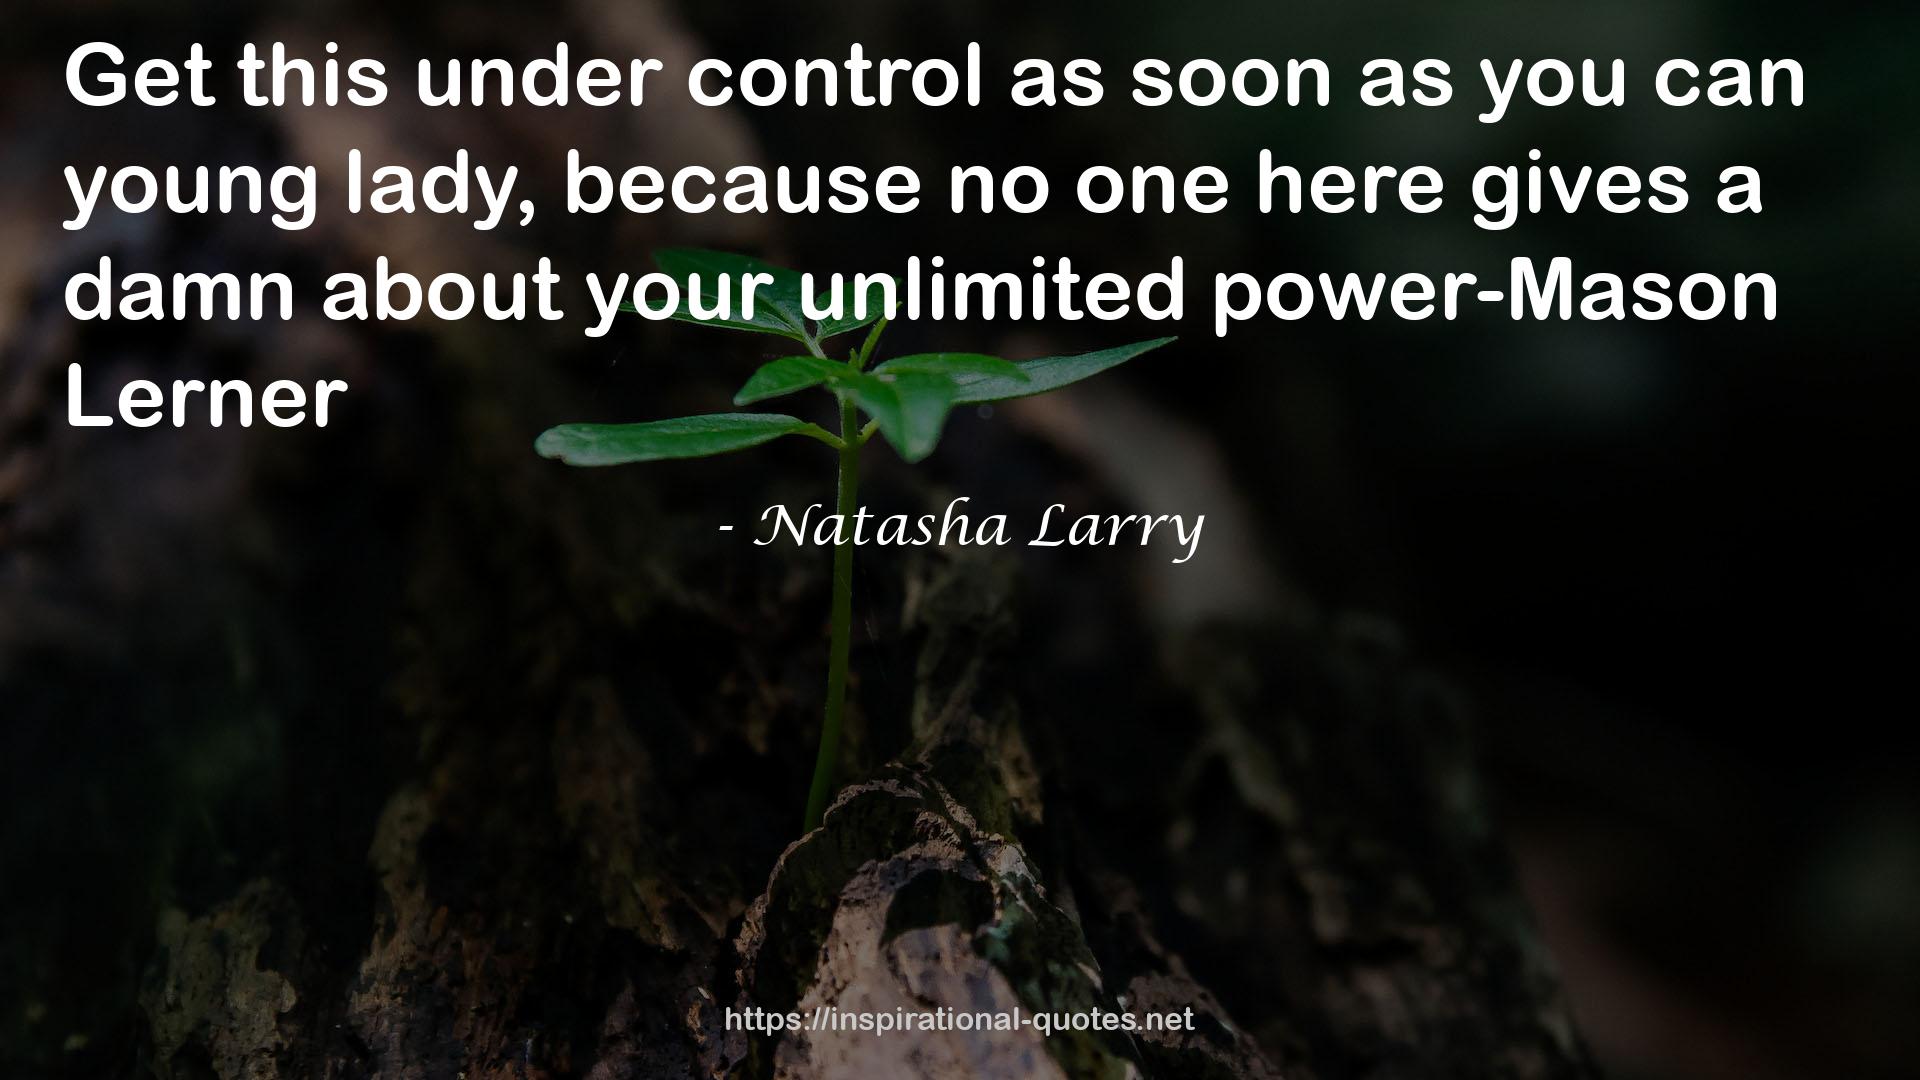 Natasha Larry quote : Get this under control as soon as you can young lady, because no one here gives a damn about your unlimited power-Mason Lerner